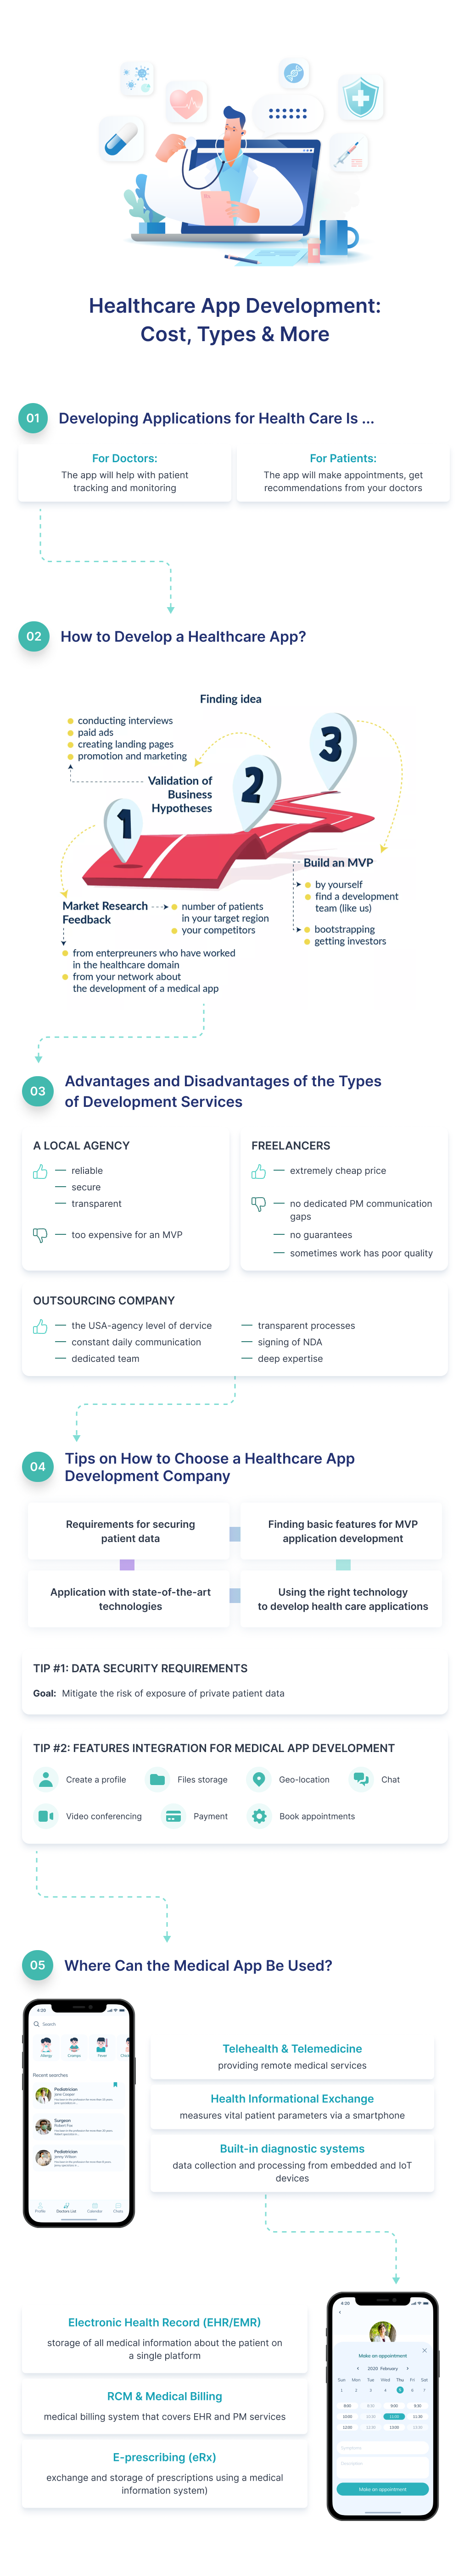 This infographic covers a step-by-step process of builig healthcare app from scratch